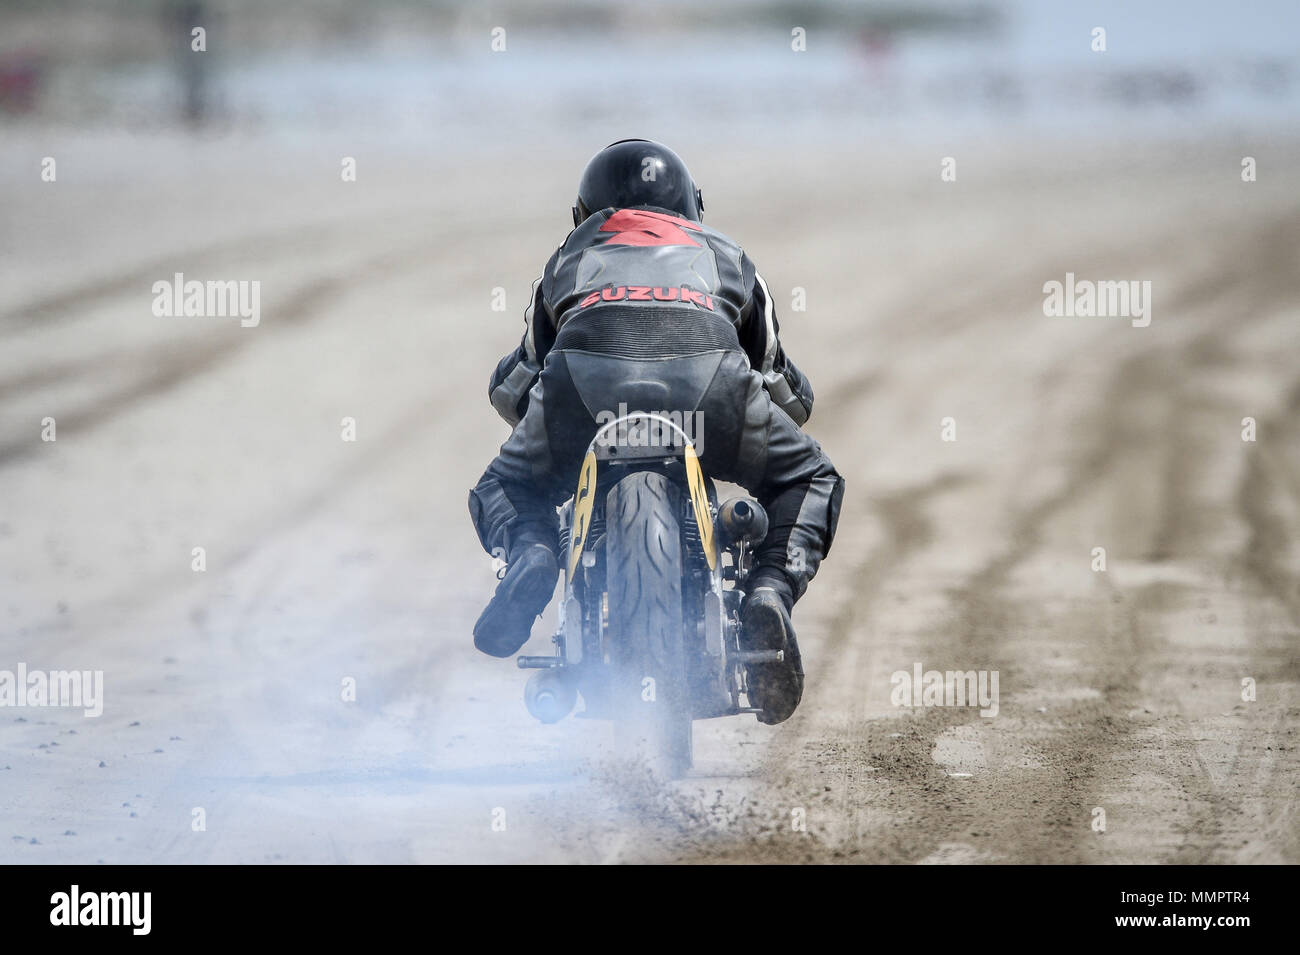 A competitor on motorbike takes part in the annual UK, European and World land speed event organised by Straightliners, at Pendine Sands, Wales, where riders and drivers of all vehicle types compete in classes for top speeds over a measured mile on the beach. Stock Photo